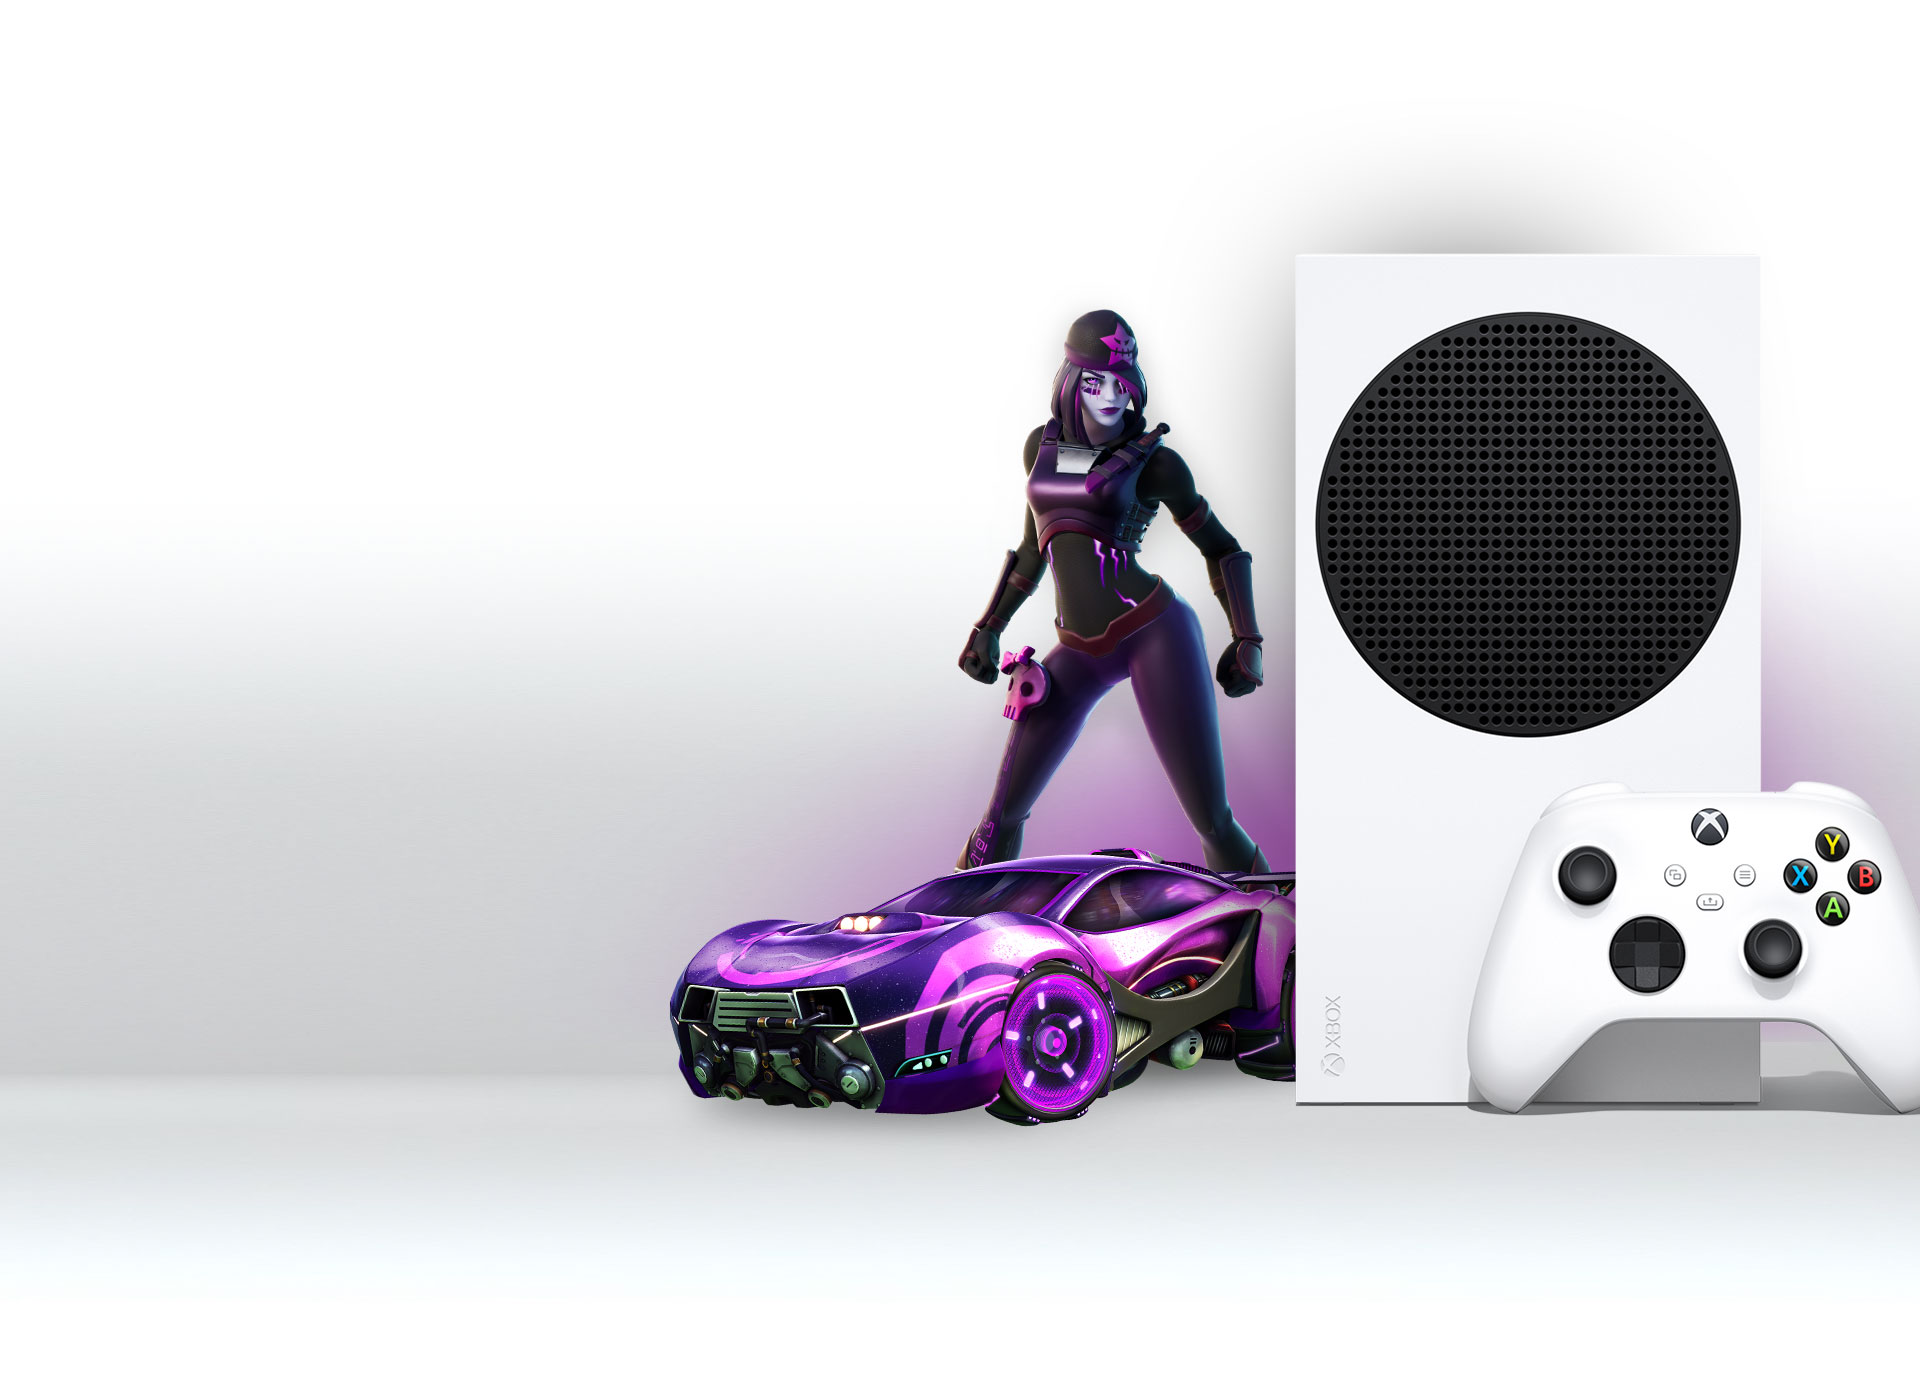 Side angle of an Xbox Series S console in front of a Fortnite character and car from Rocket League with Midnight Drive Pack items equipped.